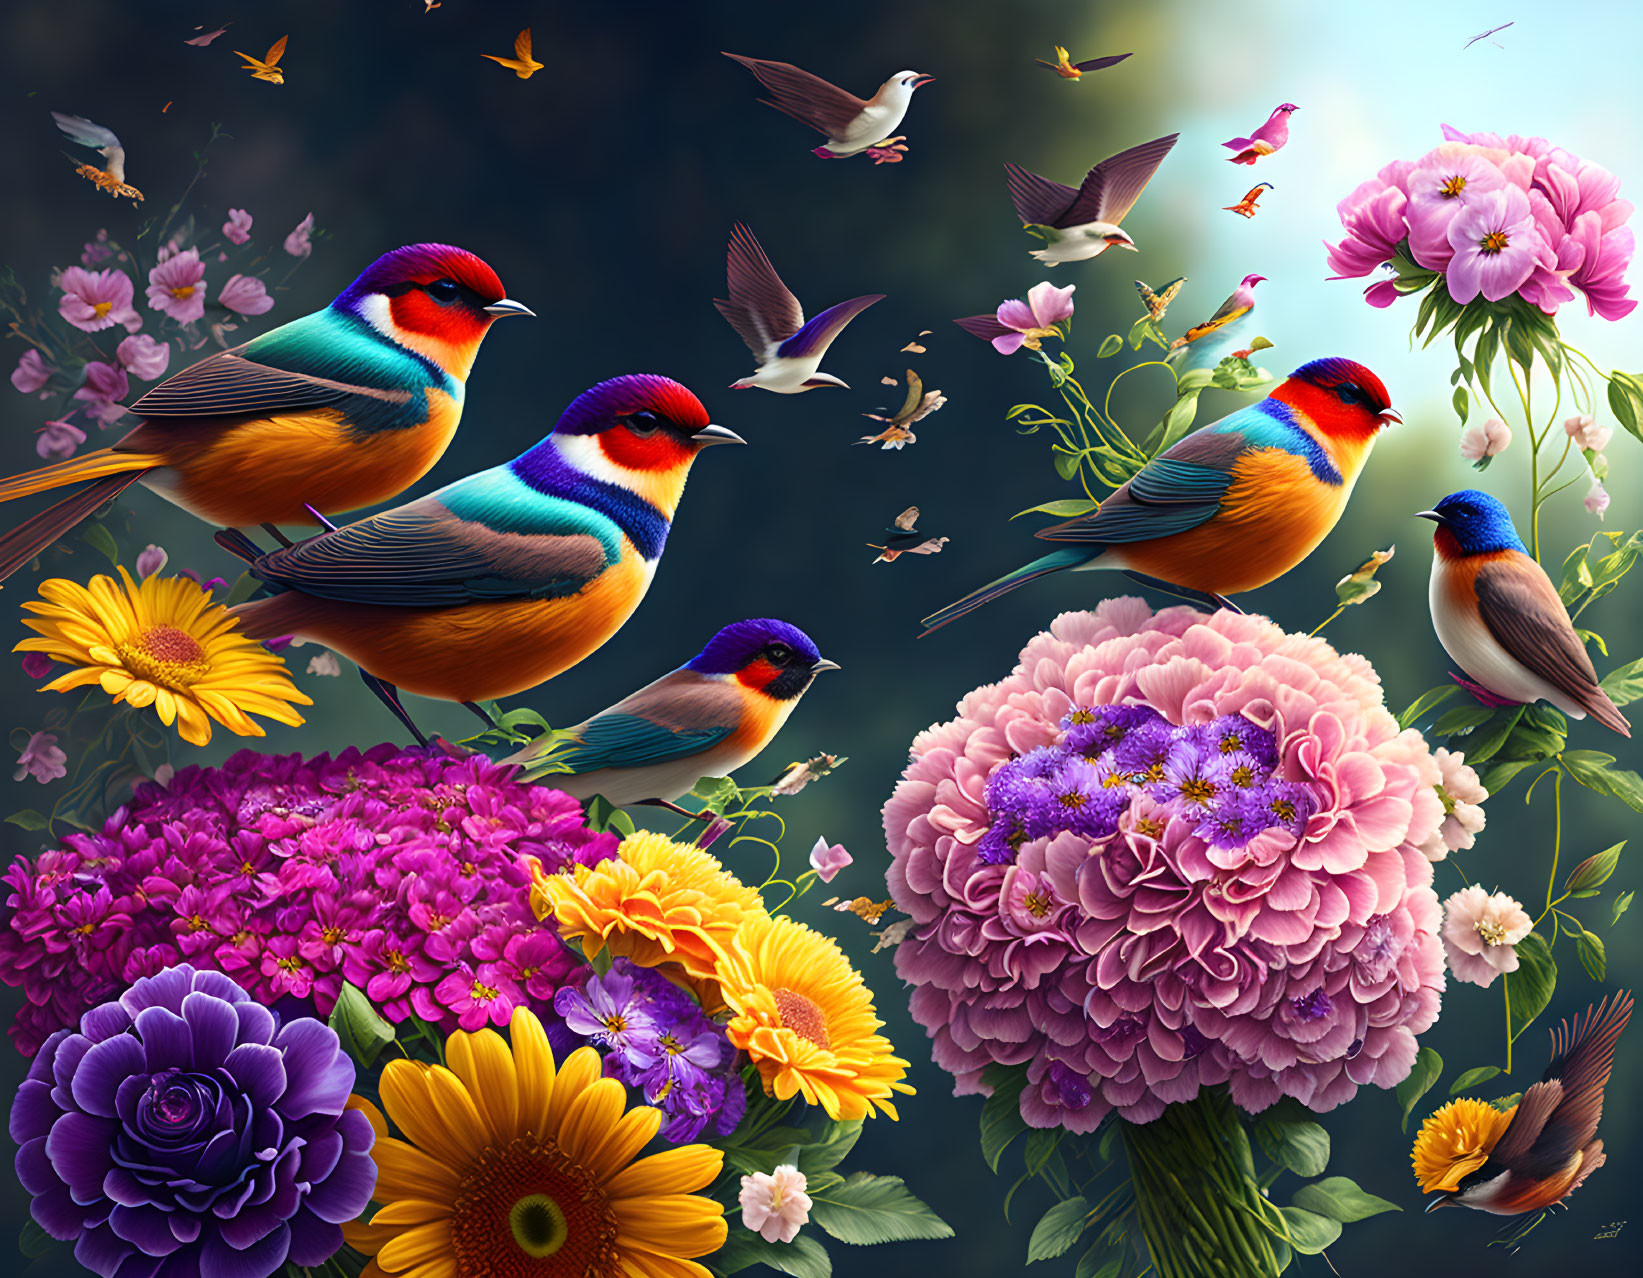 Colorful birds and flowers illustration with insects on blue sky